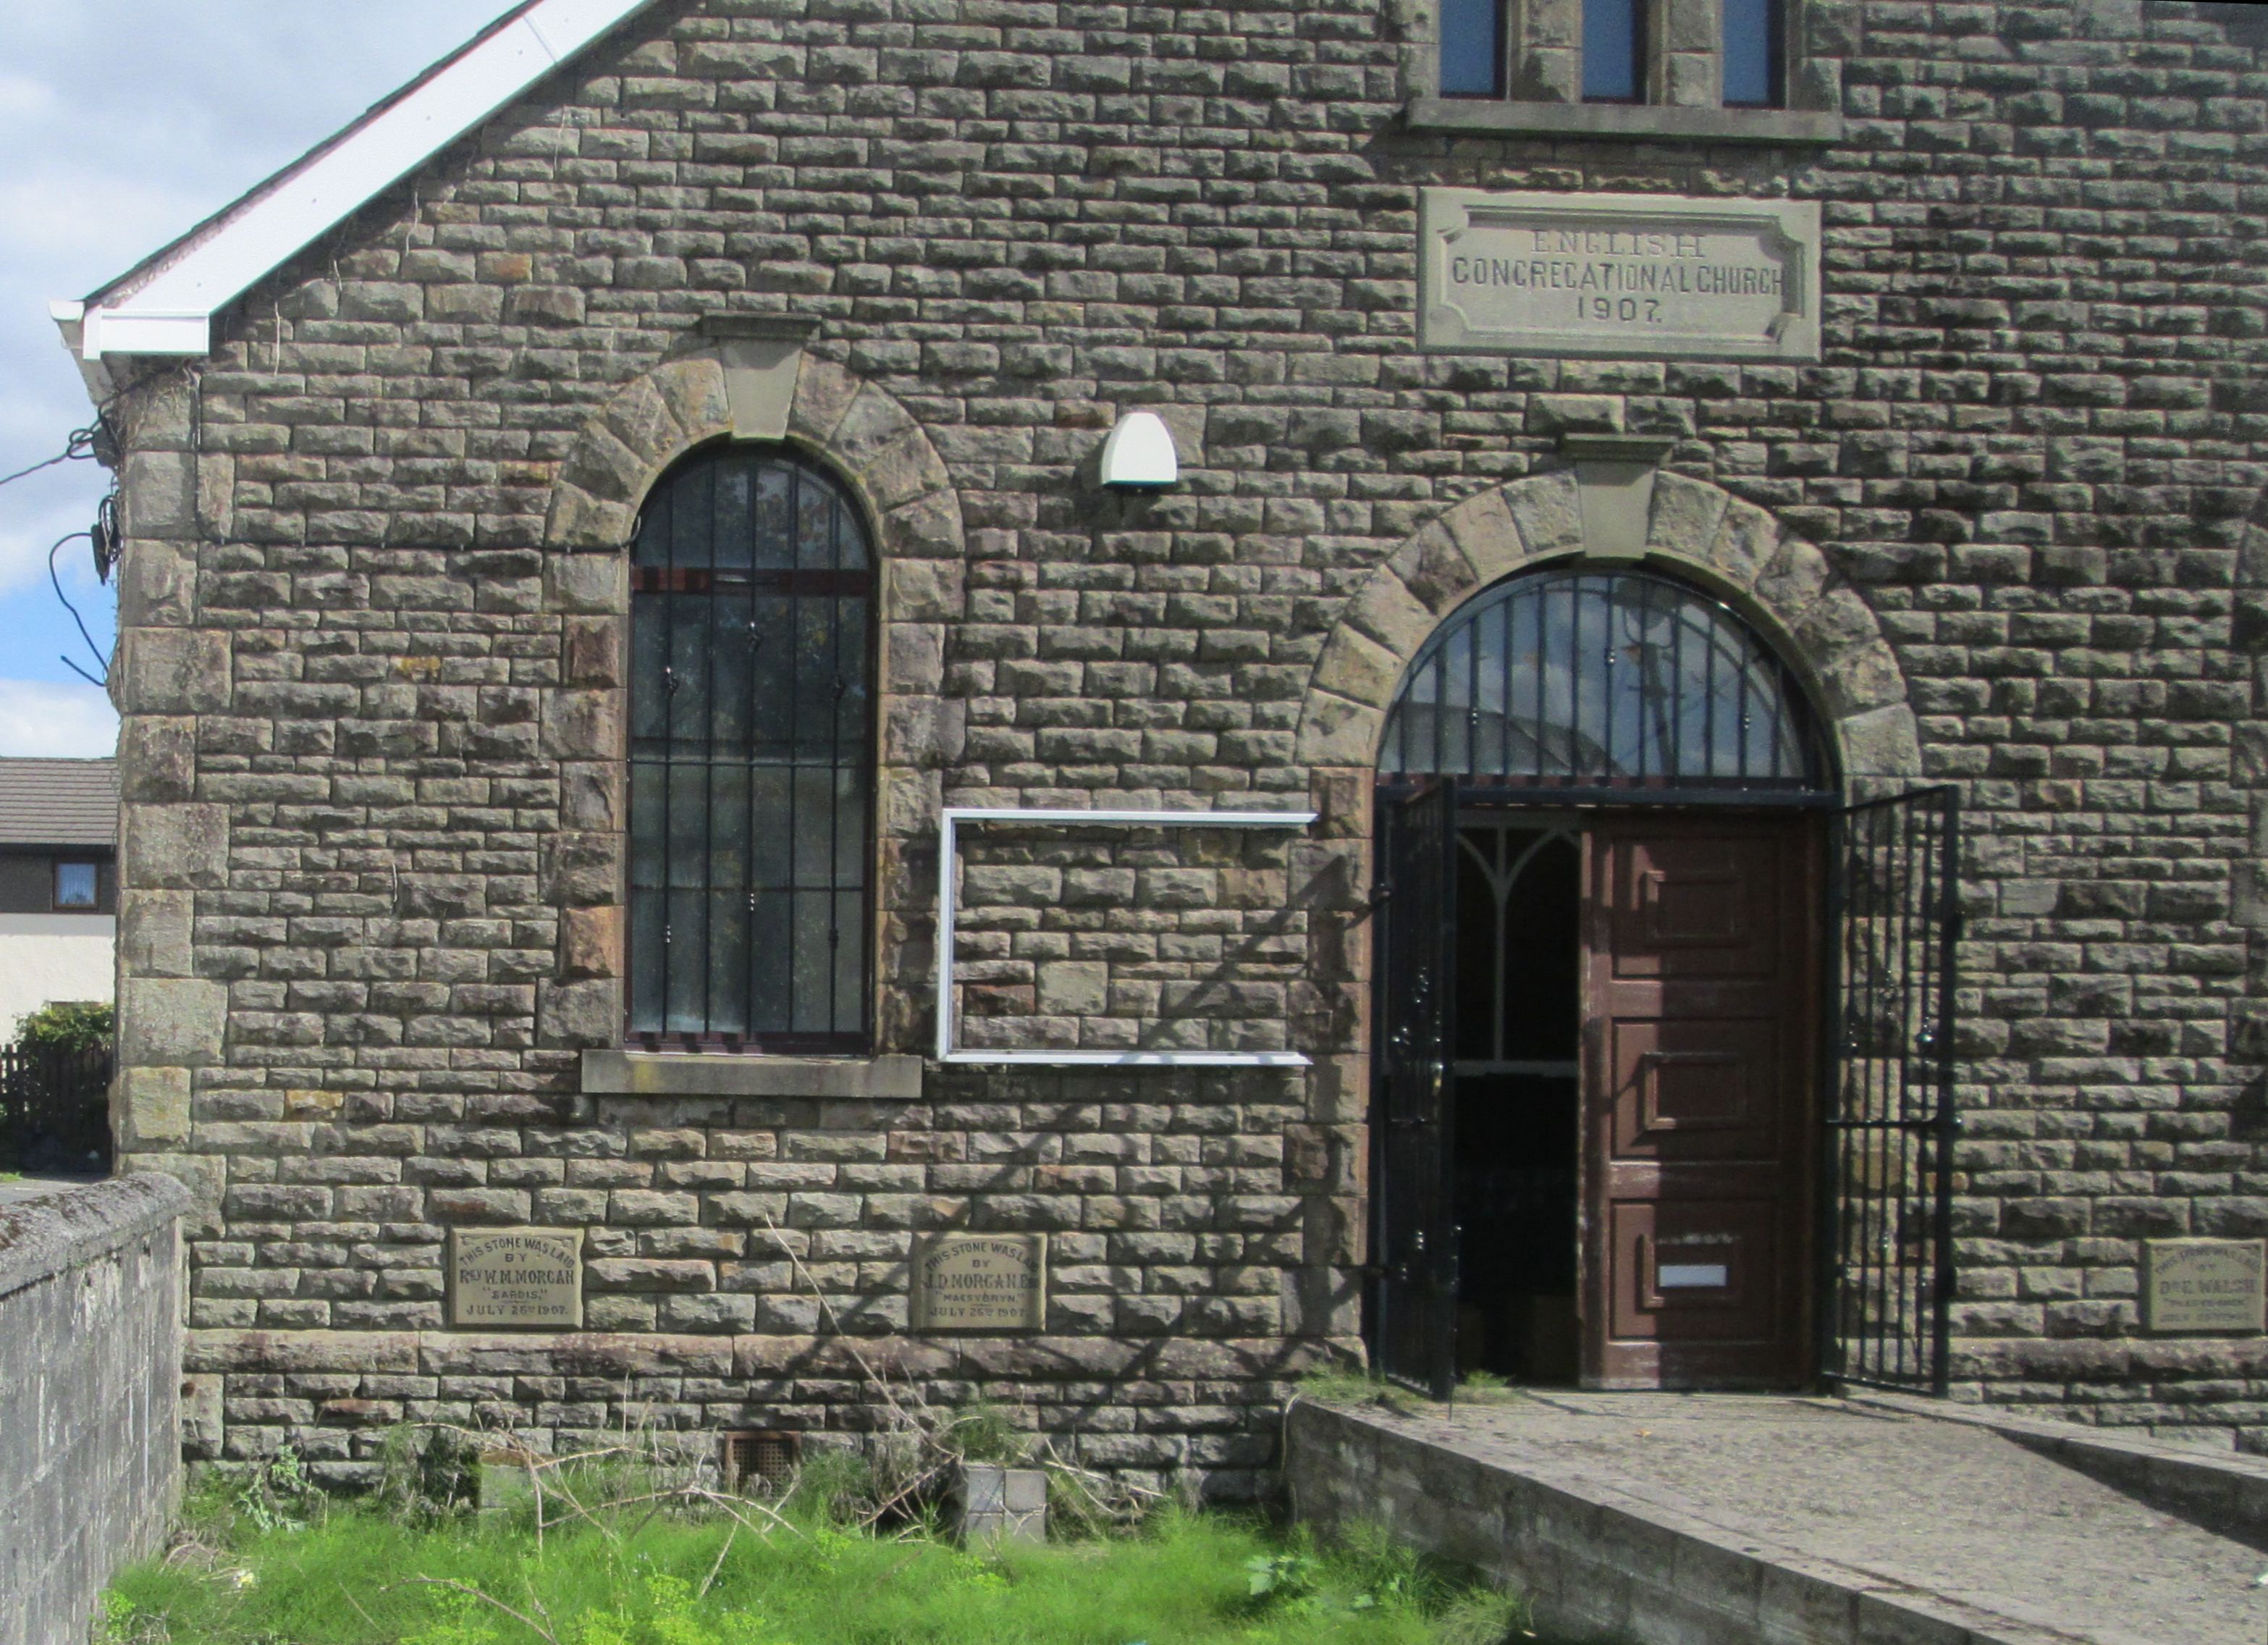 The left side of the building of the English Congregational Church